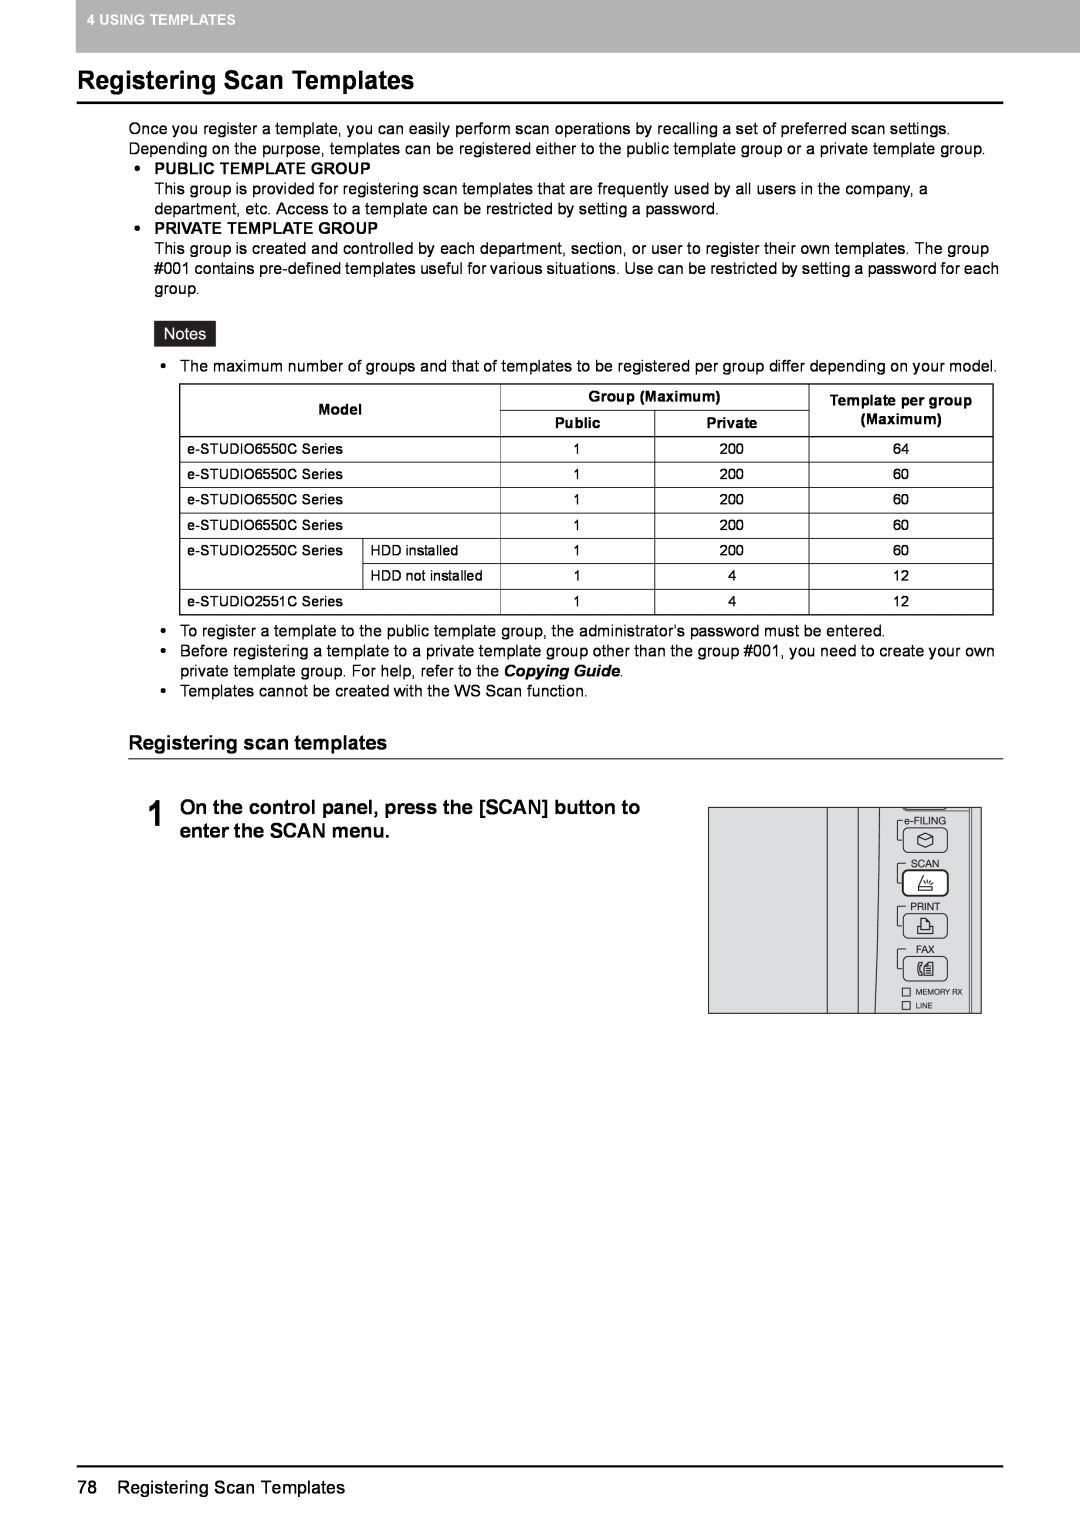 Toshiba 4540C Registering Scan Templates, Registering scan templates, y PUBLIC TEMPLATE GROUP, y PRIVATE TEMPLATE GROUP 